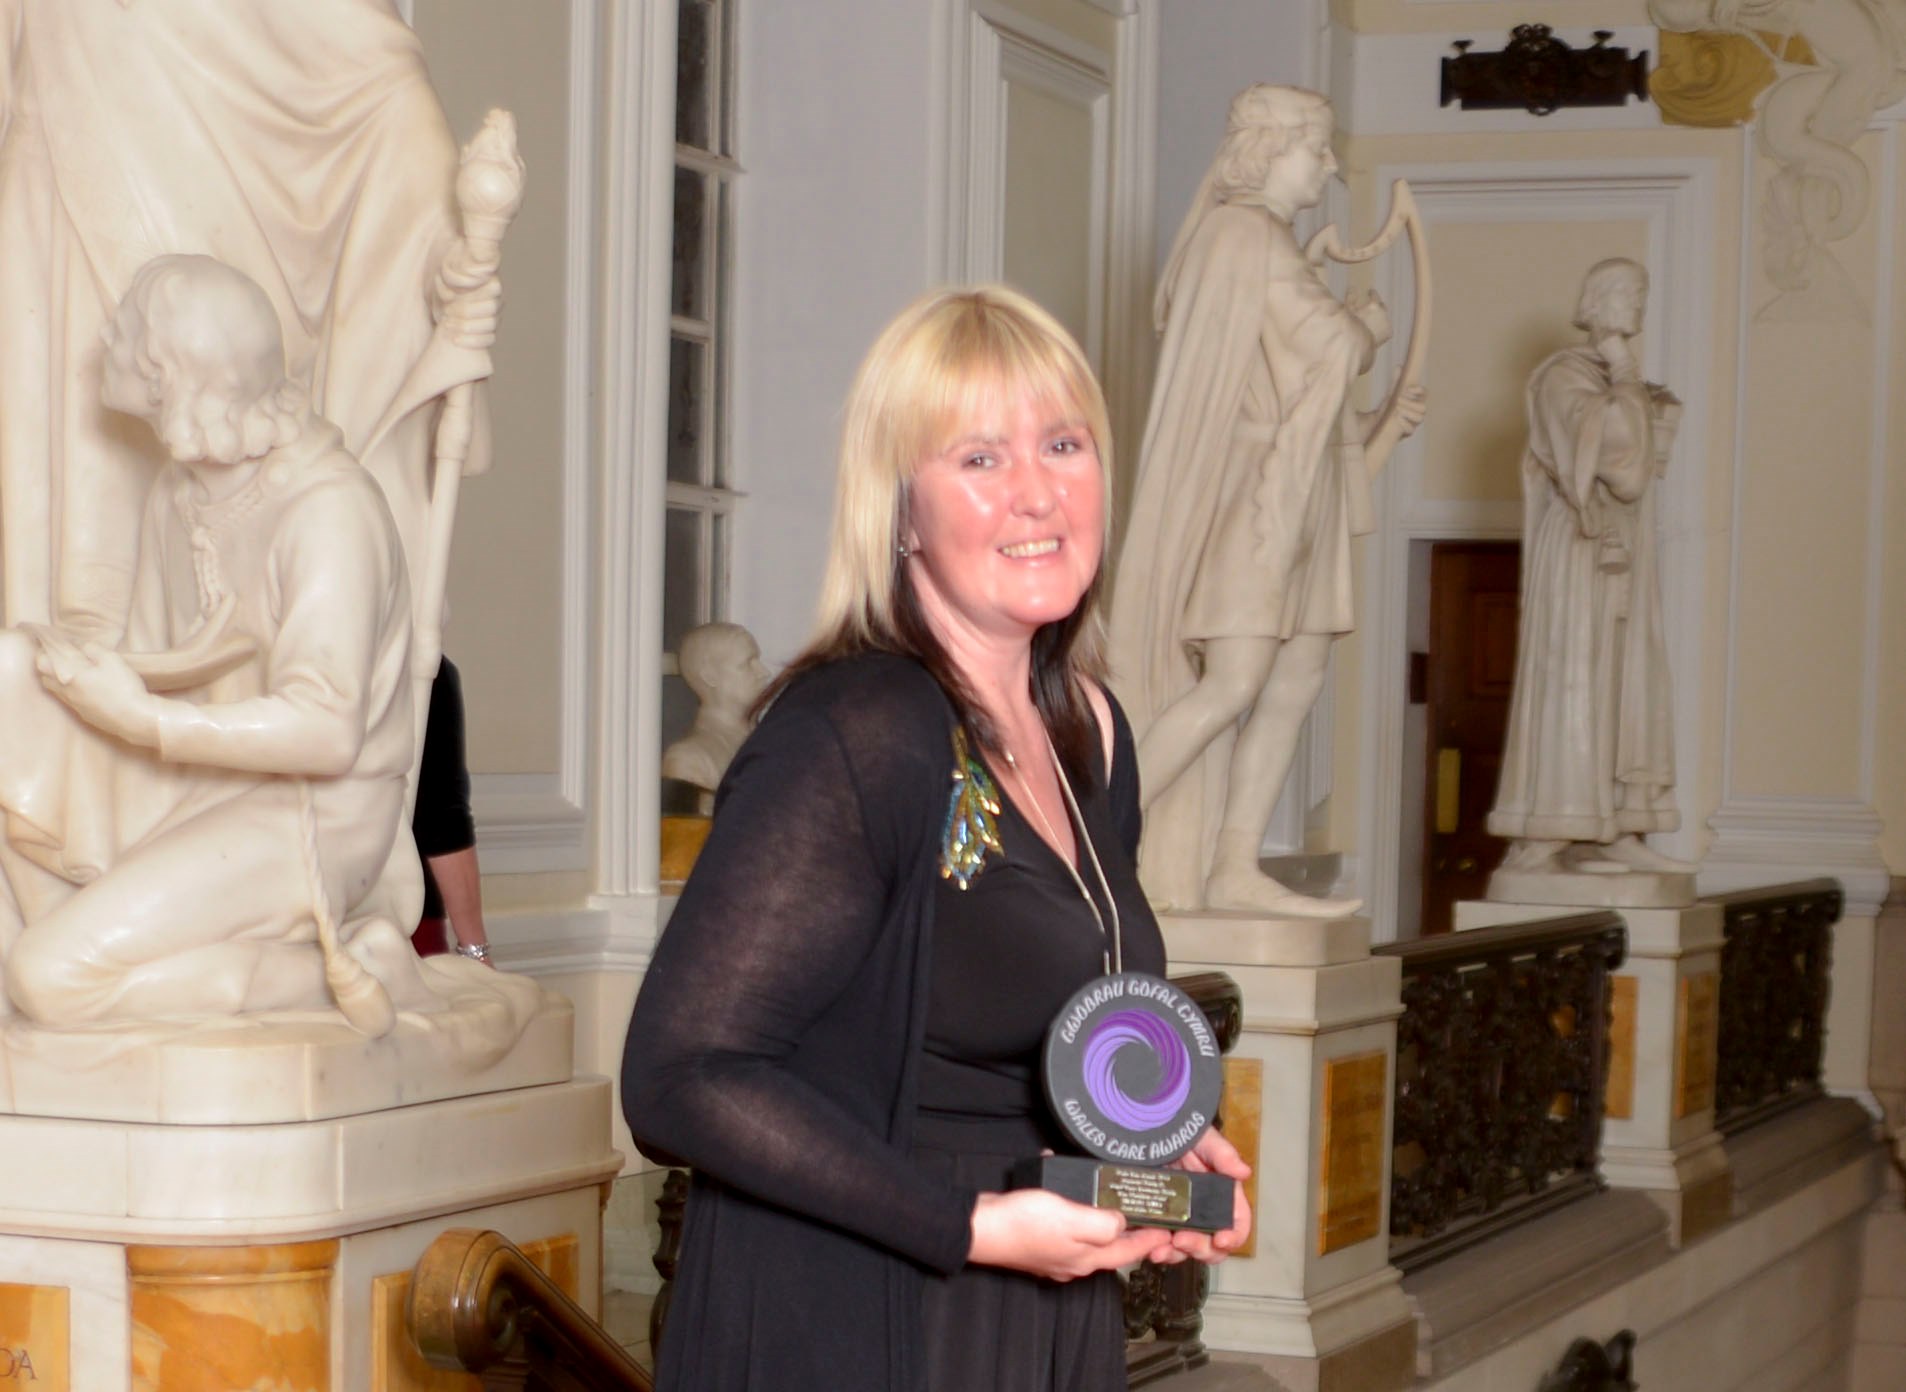 Double joy for caring Sharon at awards